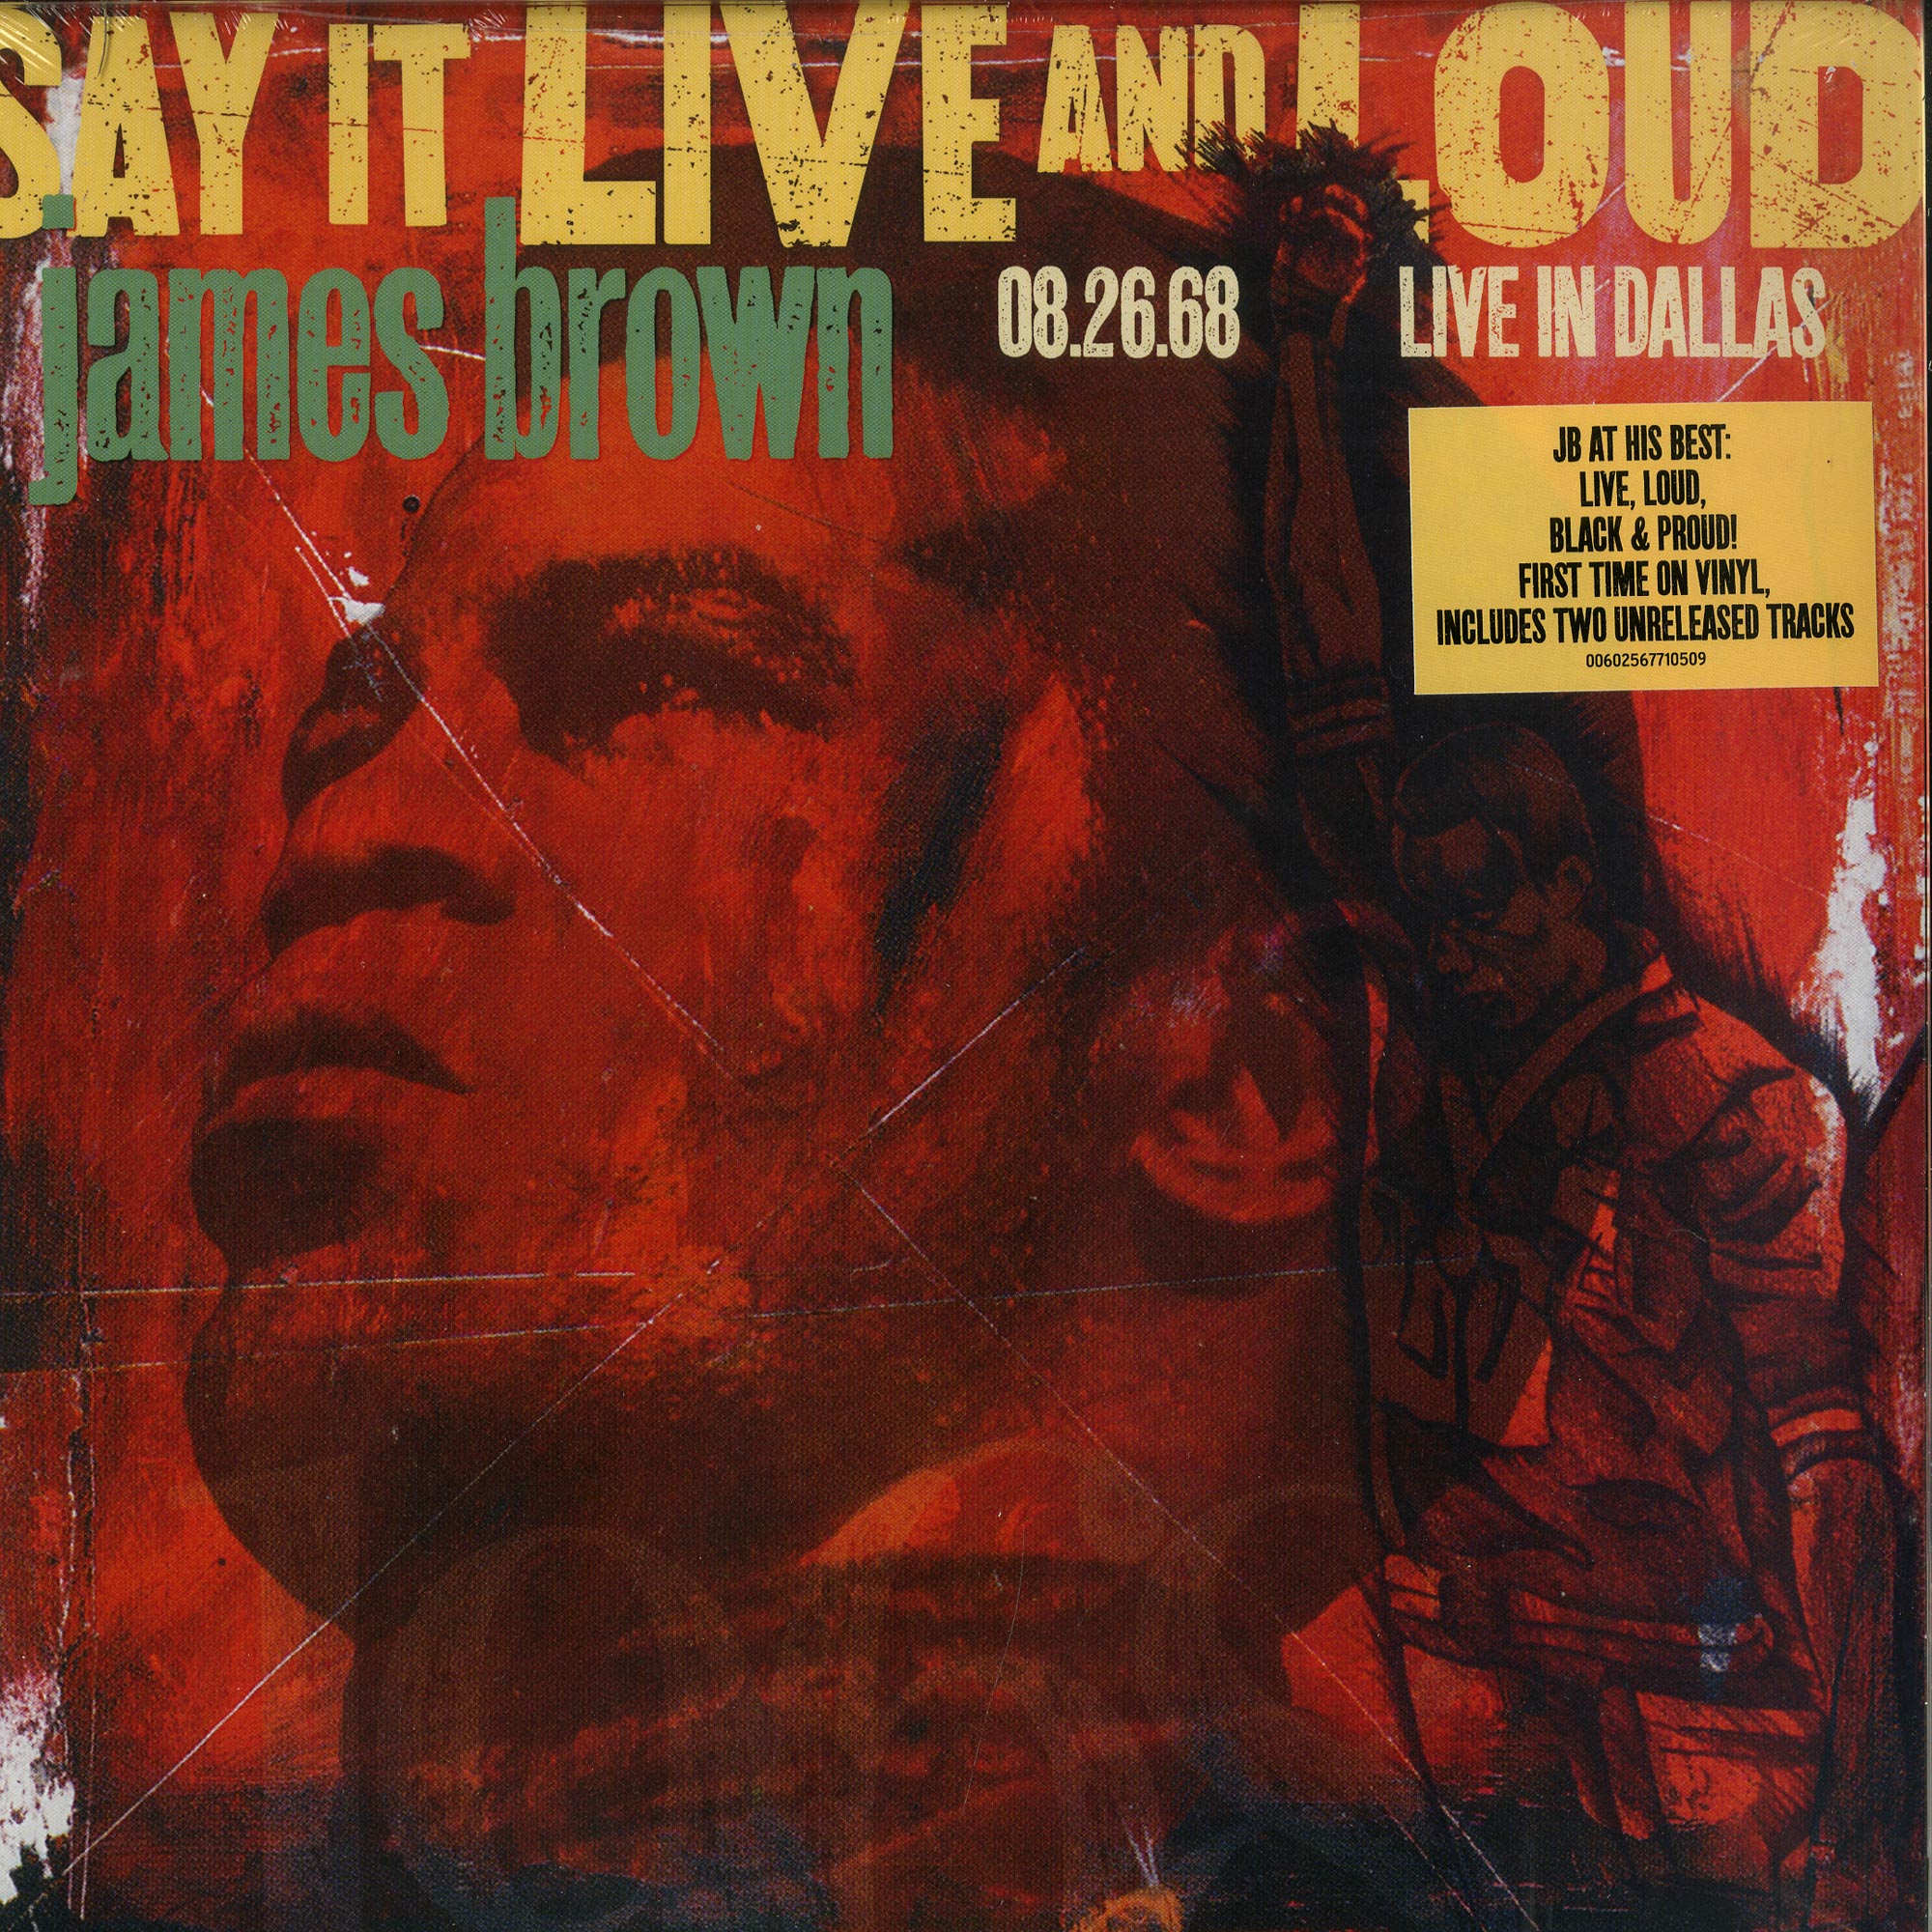 JAMES BROWN - SAY IT LIVE AND LOUD : LIVE IN DALLAS 08.26.68 - 2LP VINYL - Wah Wah Records